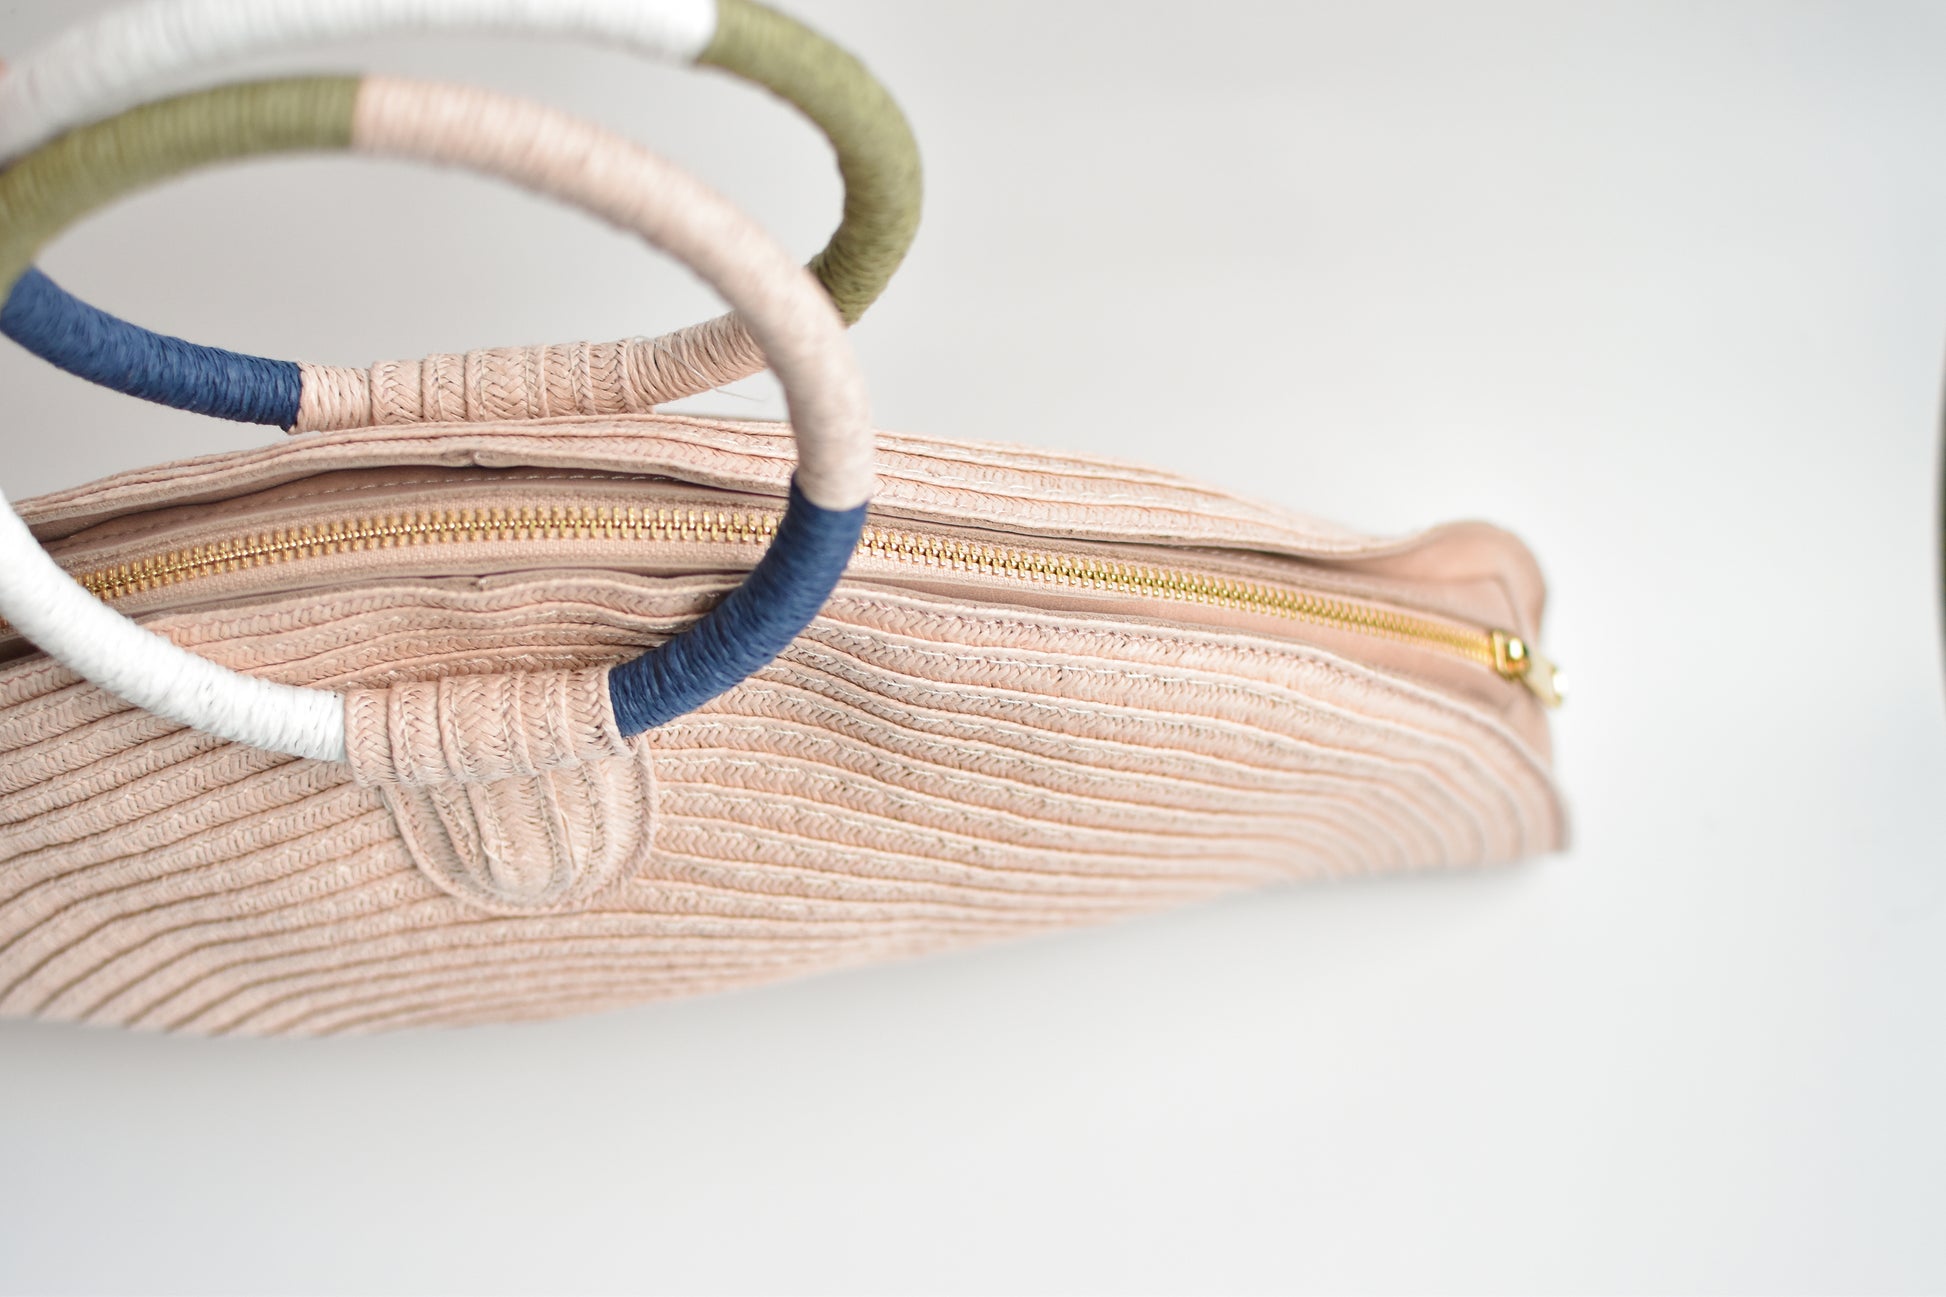 Top view of pink half-moon straw clutch with colorful wrapped circle handle and leather sides.